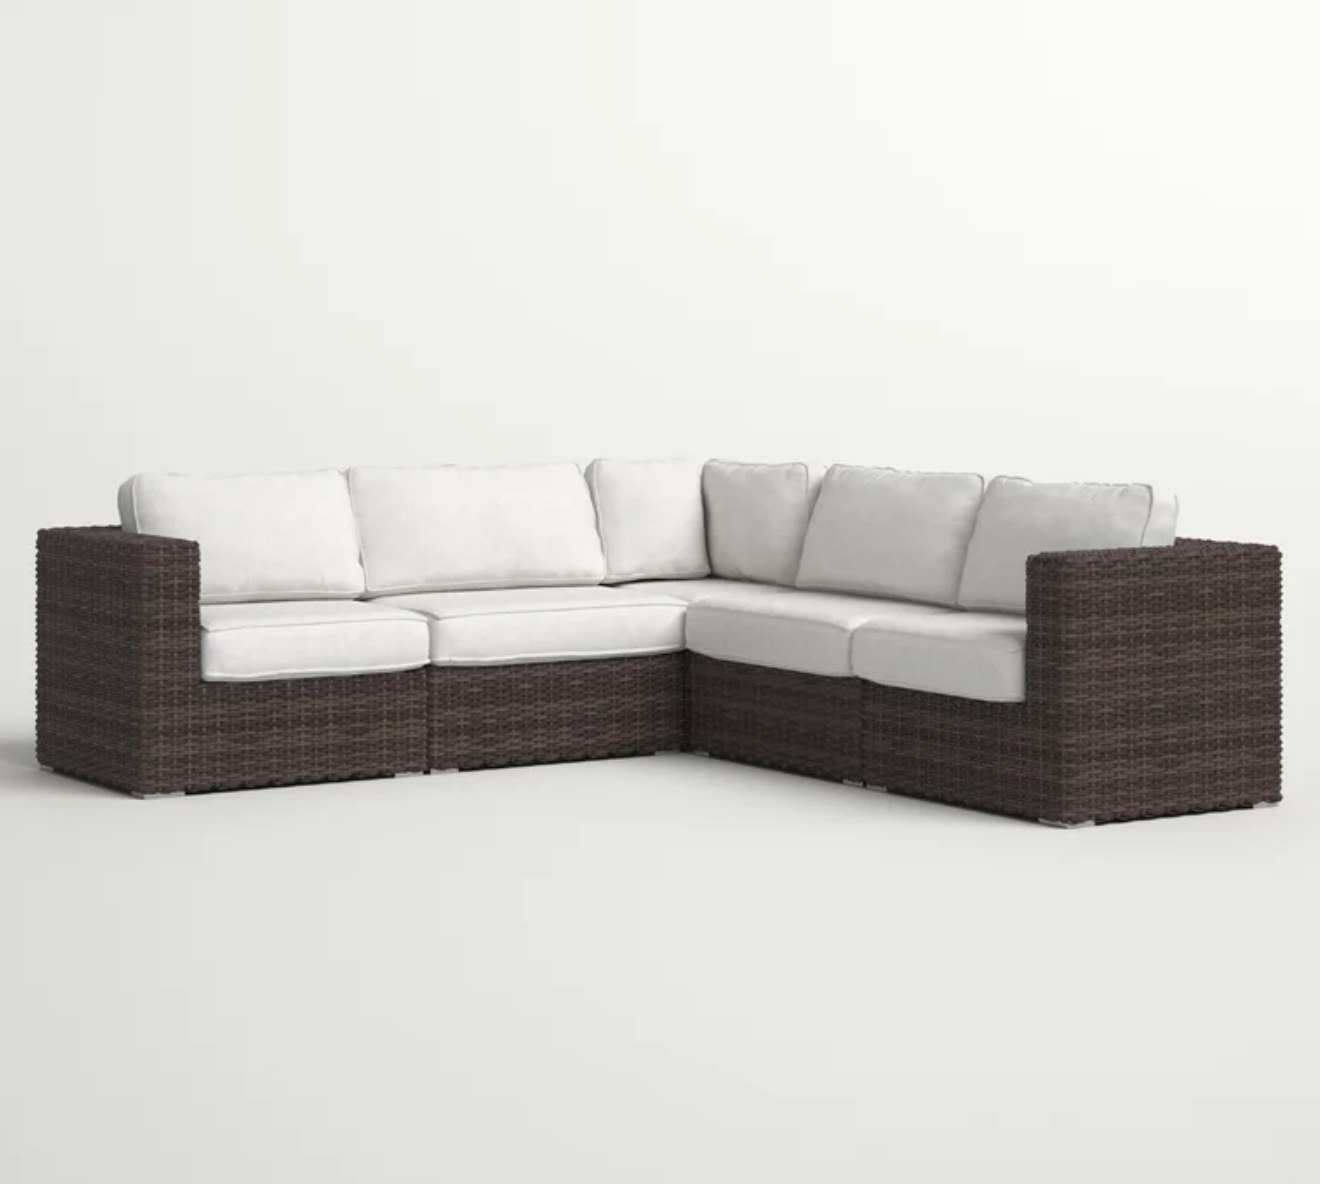 The outdoor sectional sofa